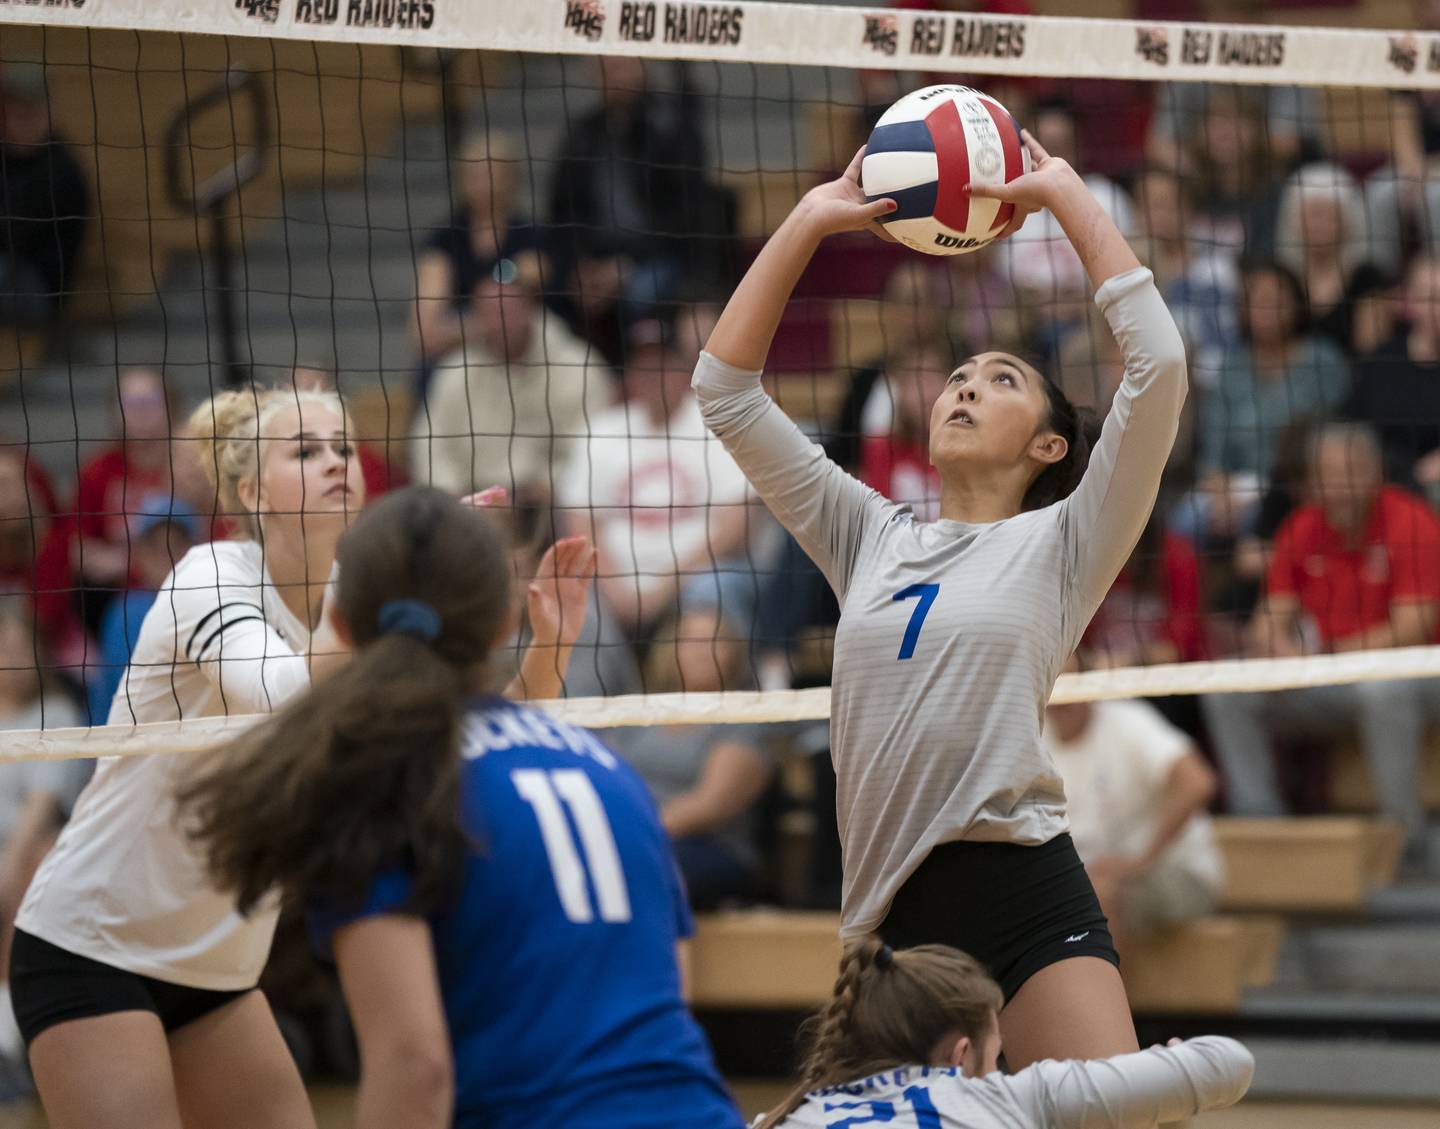 Burlington Central's Jheanne Arceo sets up the ball during their game against Huntley on Tuesday, October 4, 2022 at Huntley High School. Ryan Rayburn for Shaw Local